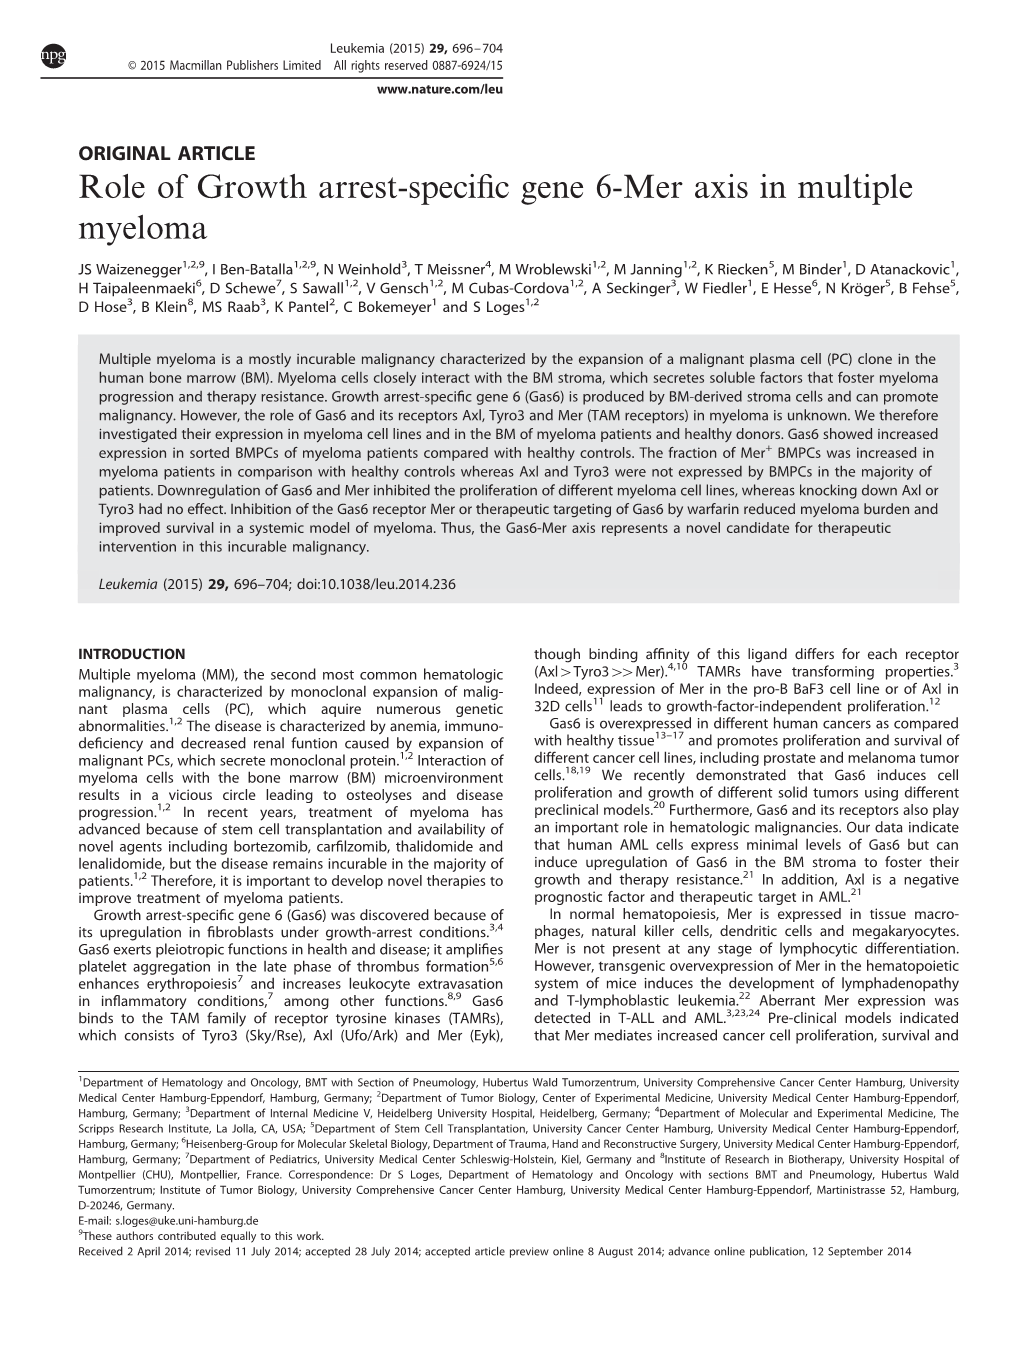 Role of Growth Arrest-Specific Gene 6-Mer Axis in Multiple Myeloma